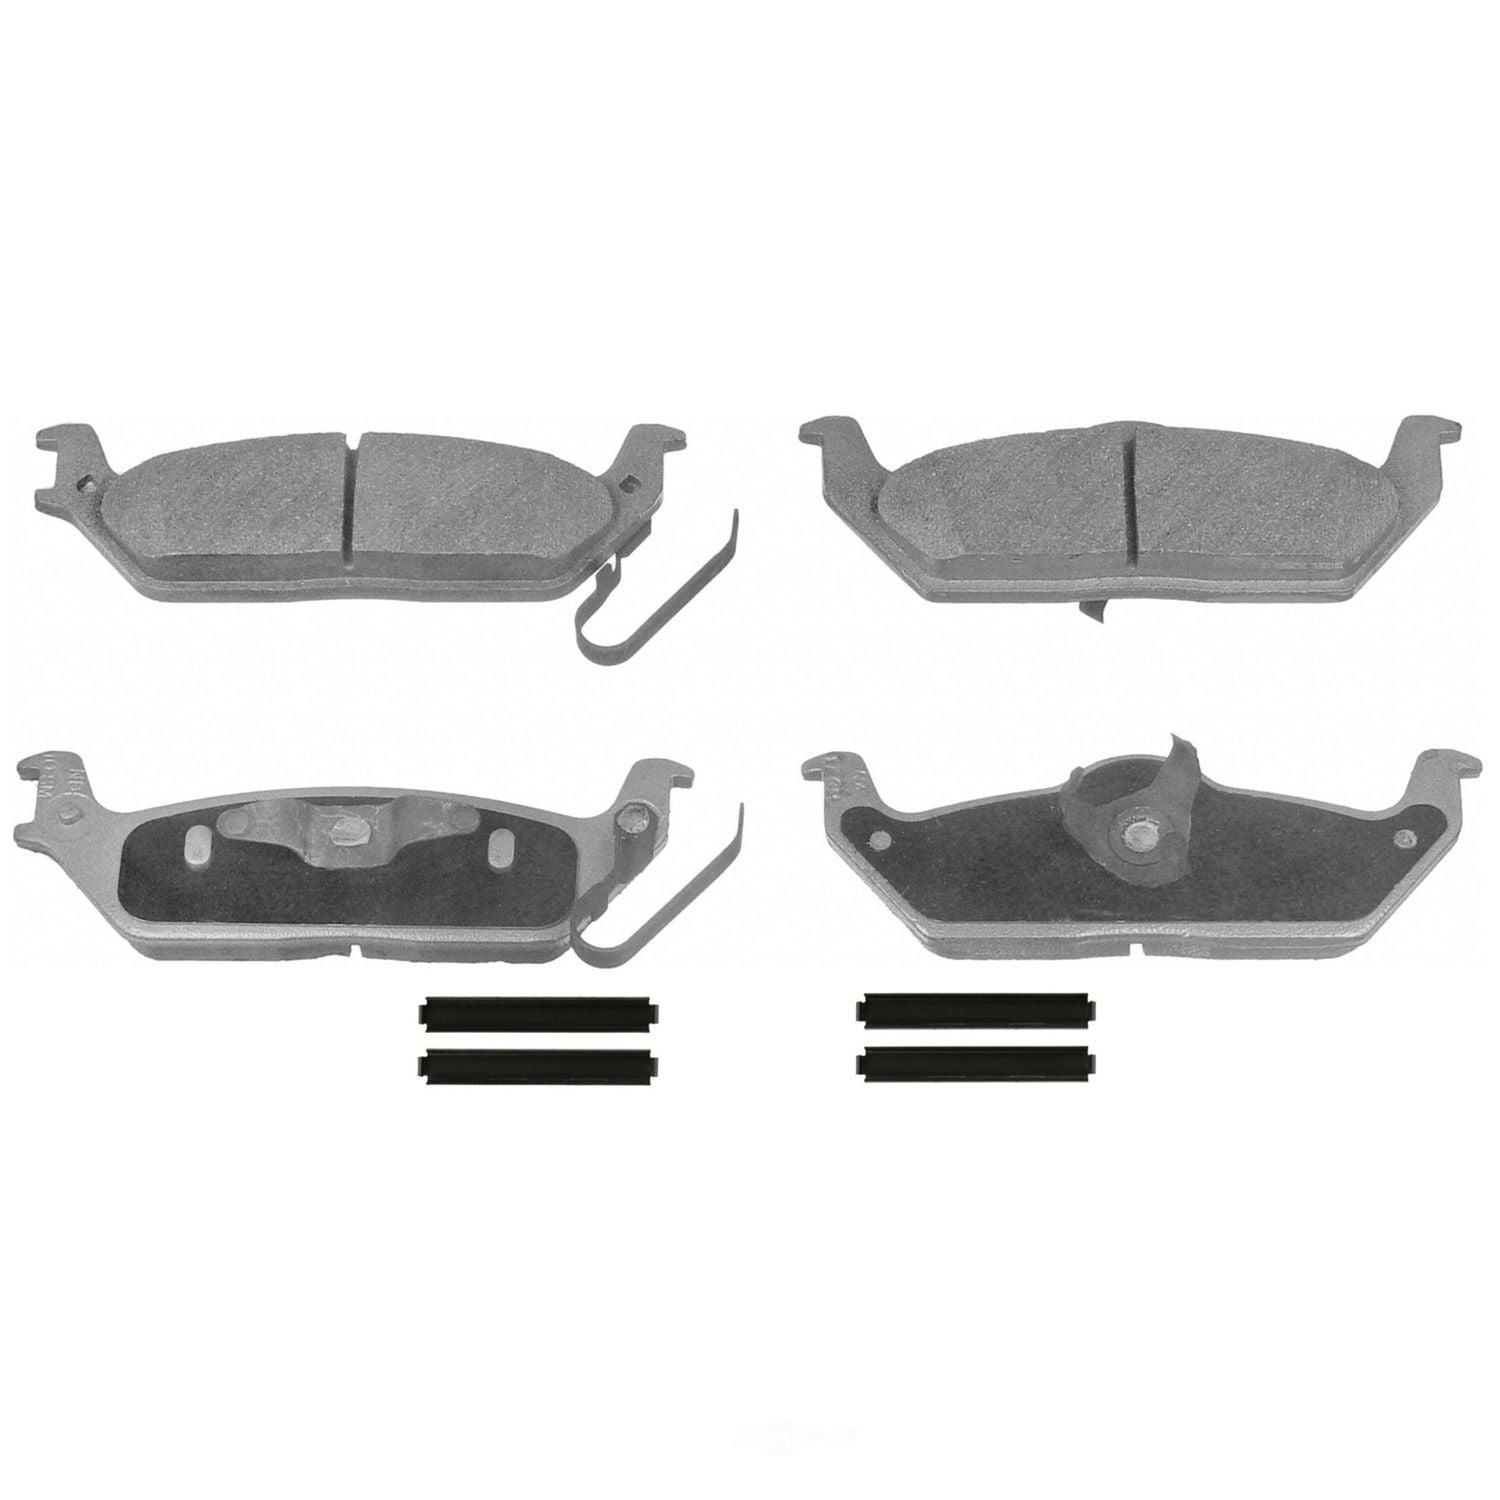 New set of Wagner ThermoQuiet rear semi metallic disk brake pads for 2006-2011 F-150 & 2006-2008 Lincoln Mark LT MX1012A